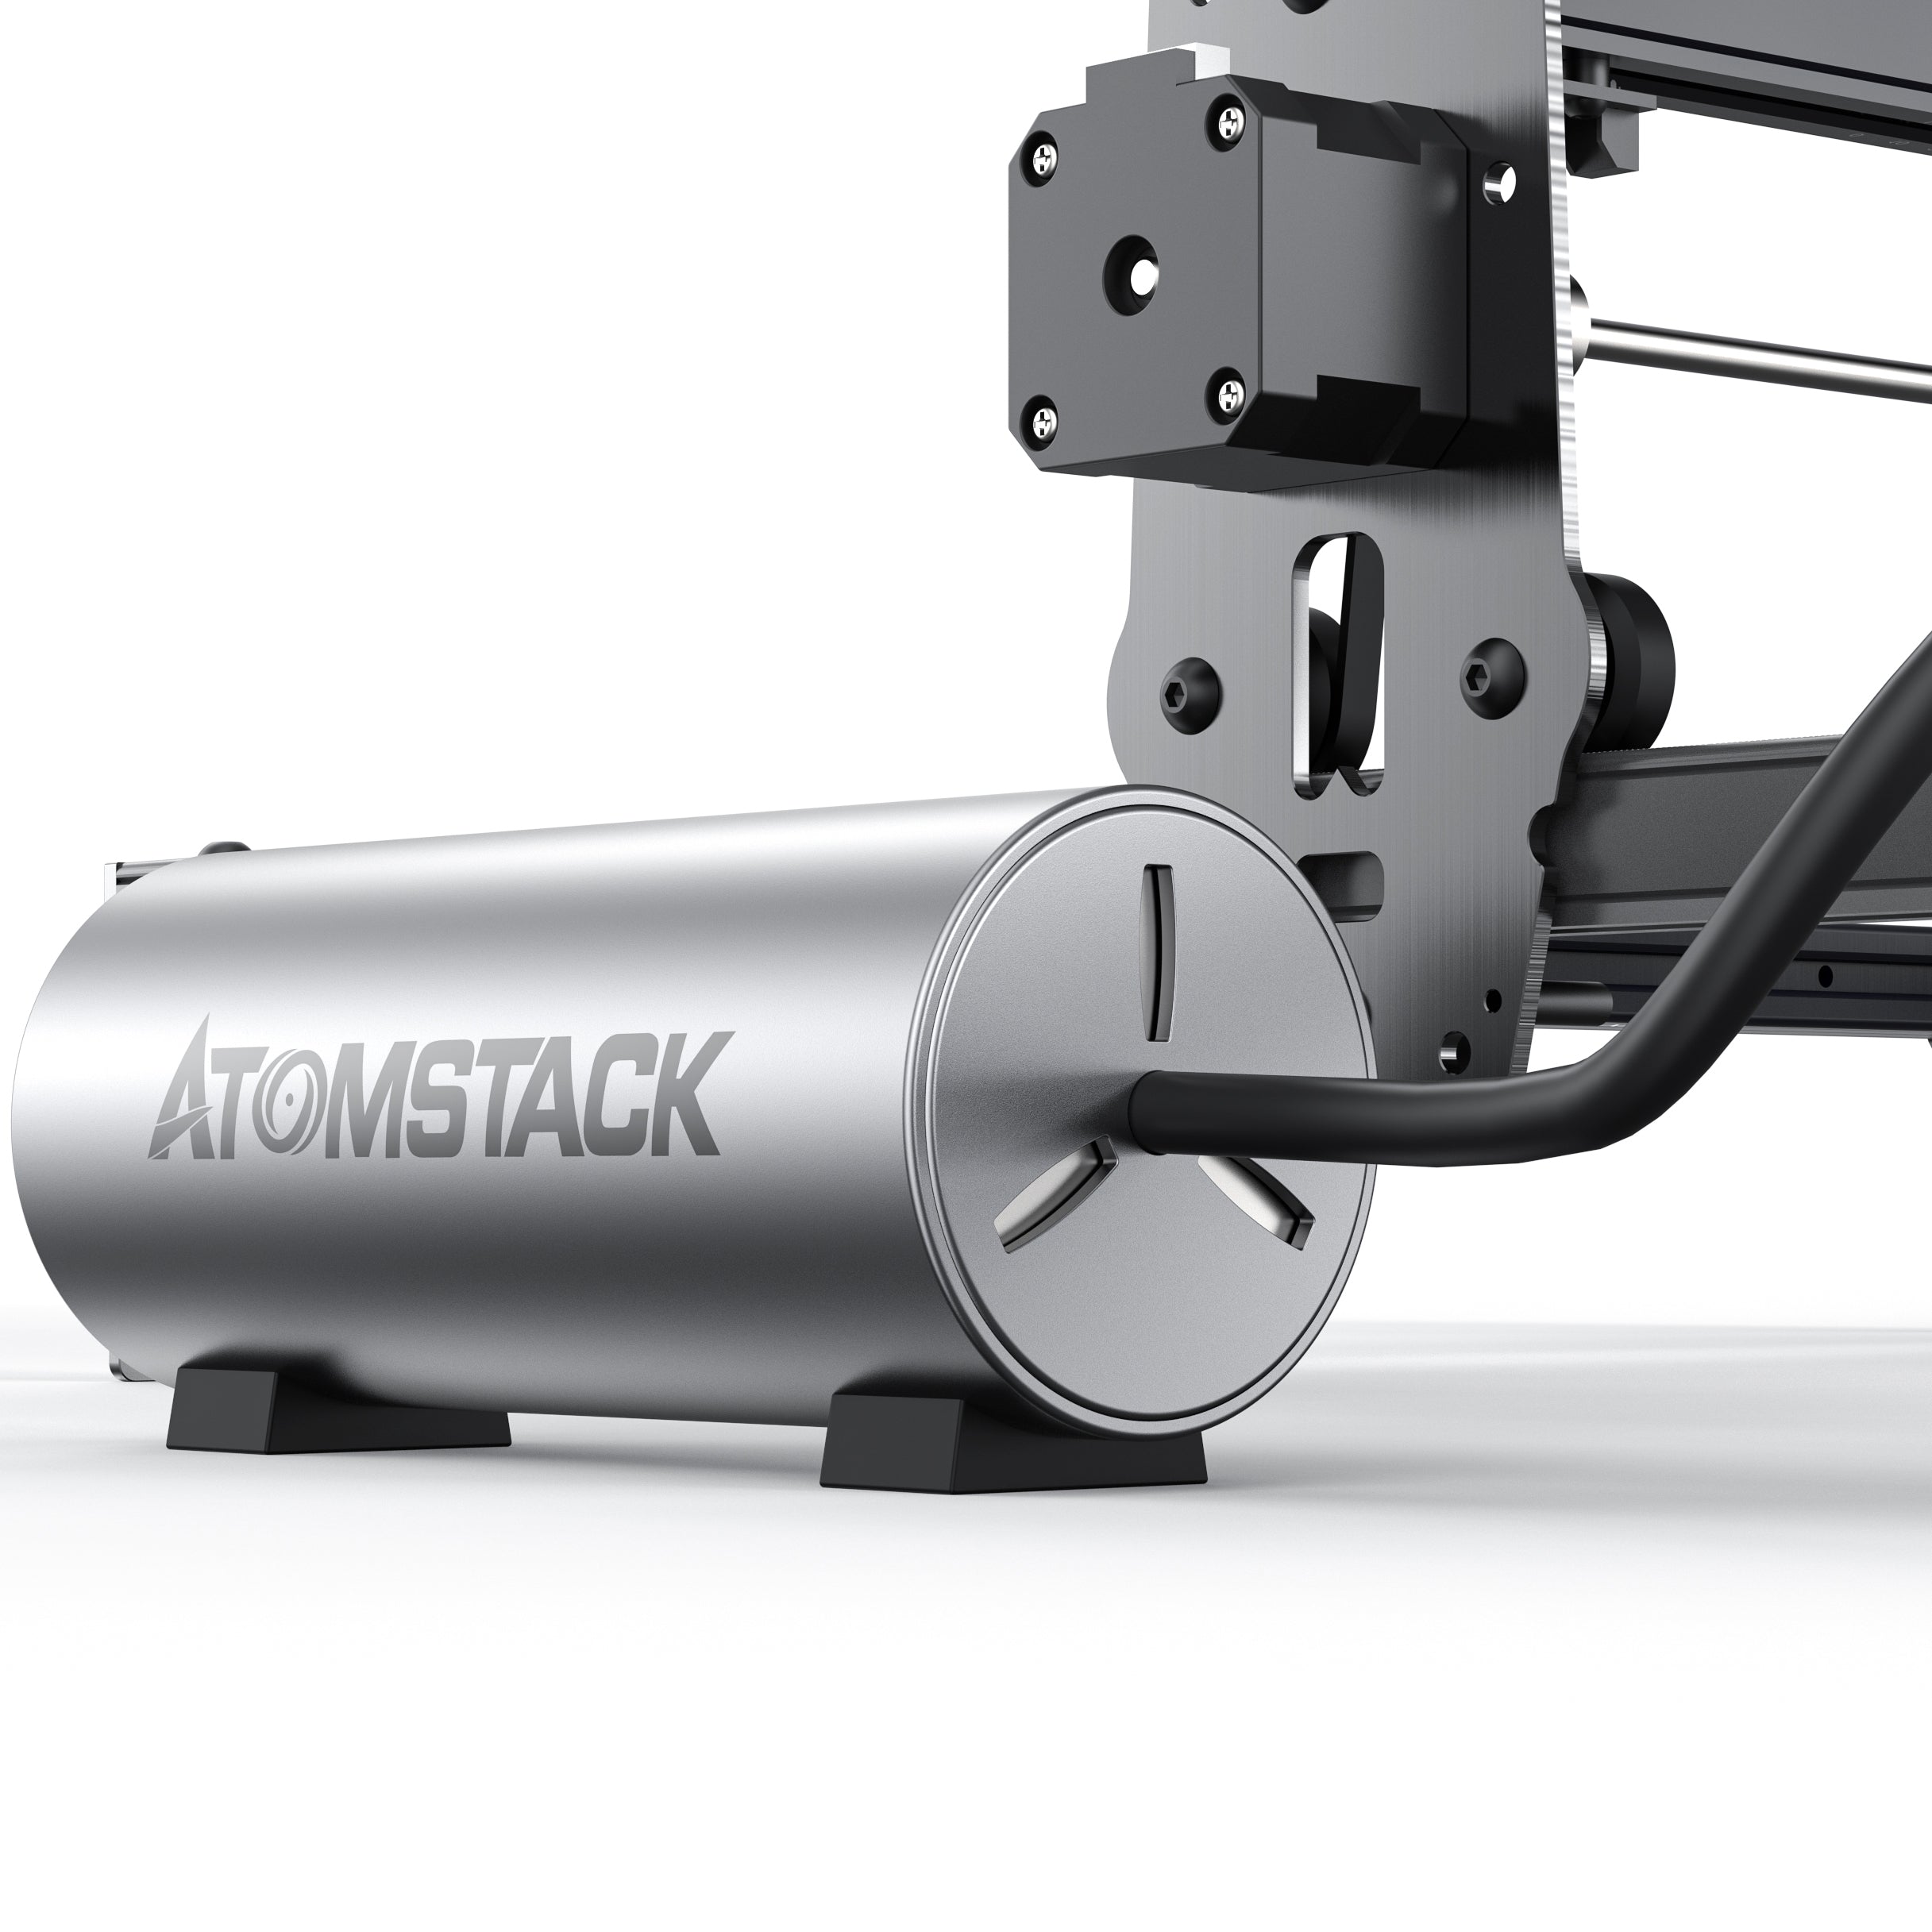 Atomstack Air Assist System for sale